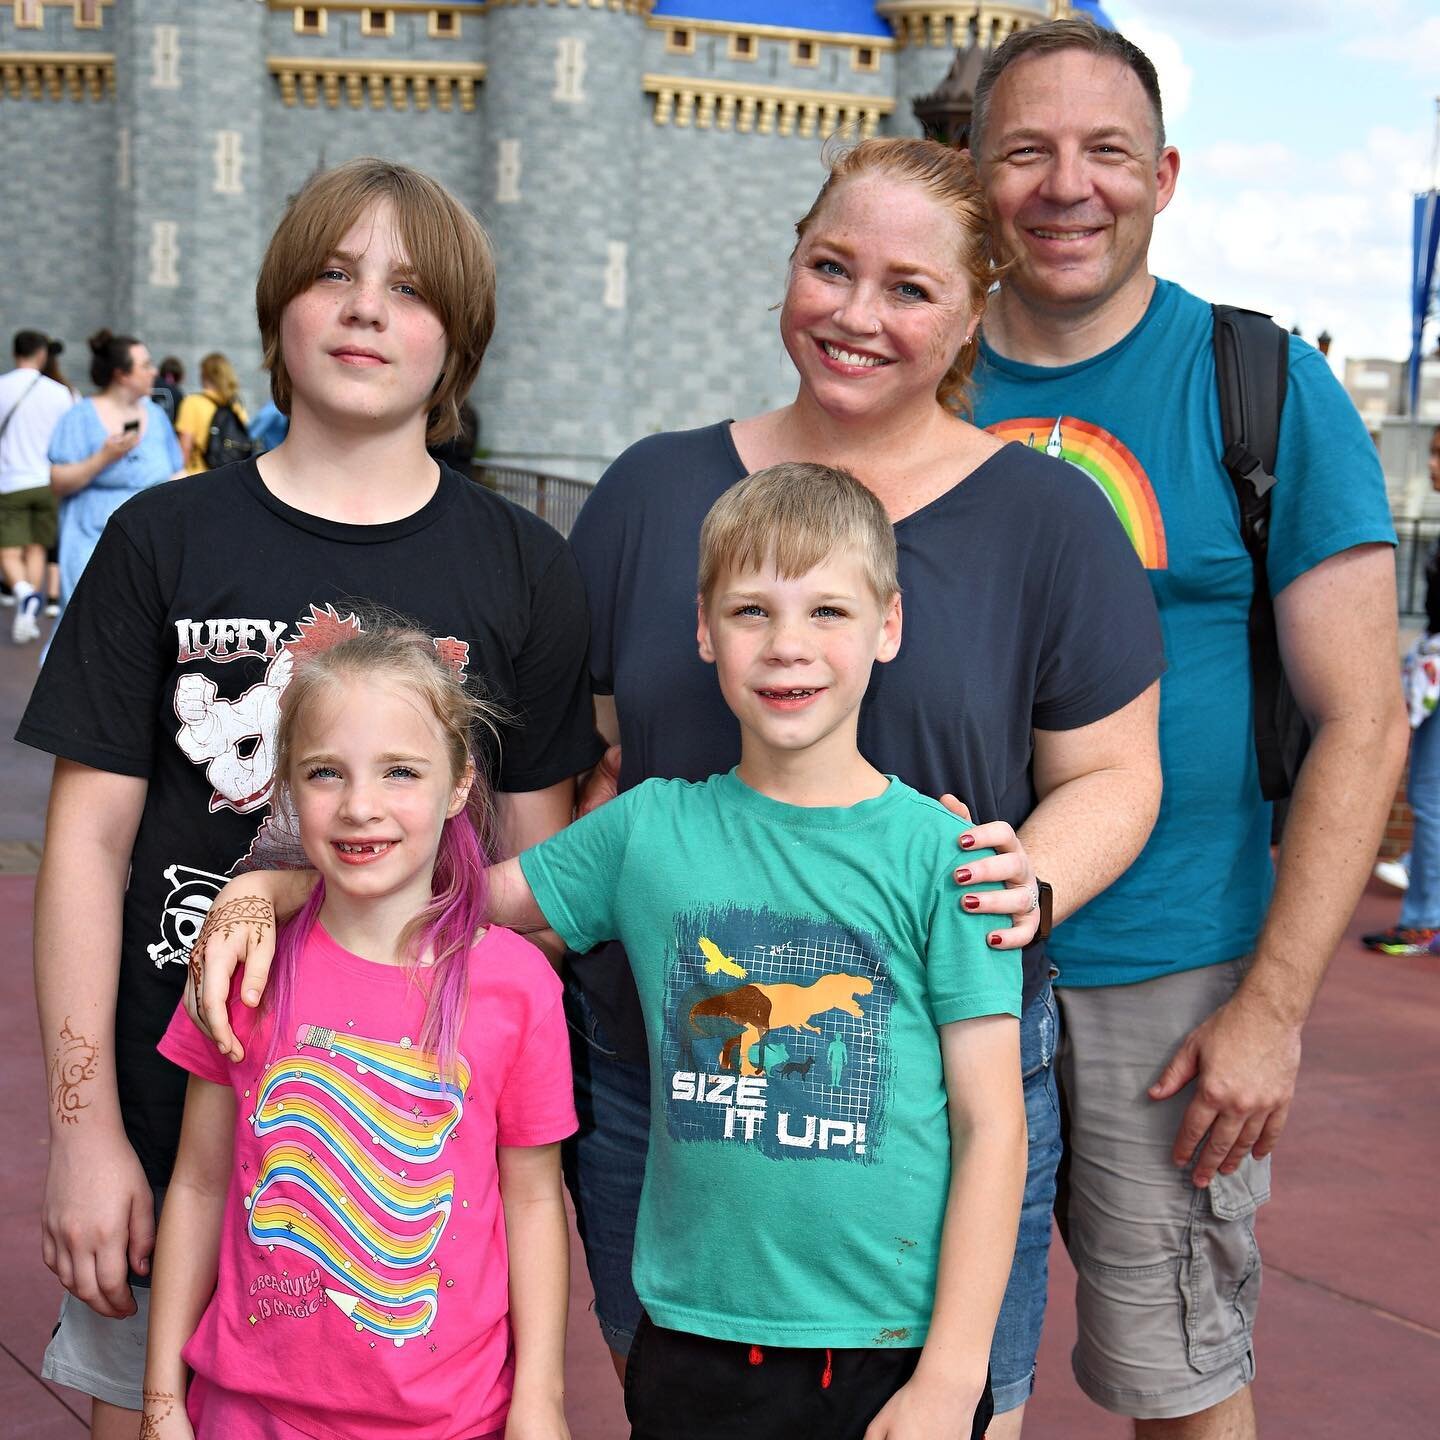 Spent a magical week at Disney last week. The kids had a blast, I lost my voice, and so many memories were made! This trip was for my kids and I wanted to experience all their laughs, screams and wonder through their eyes. I spent more time watching 